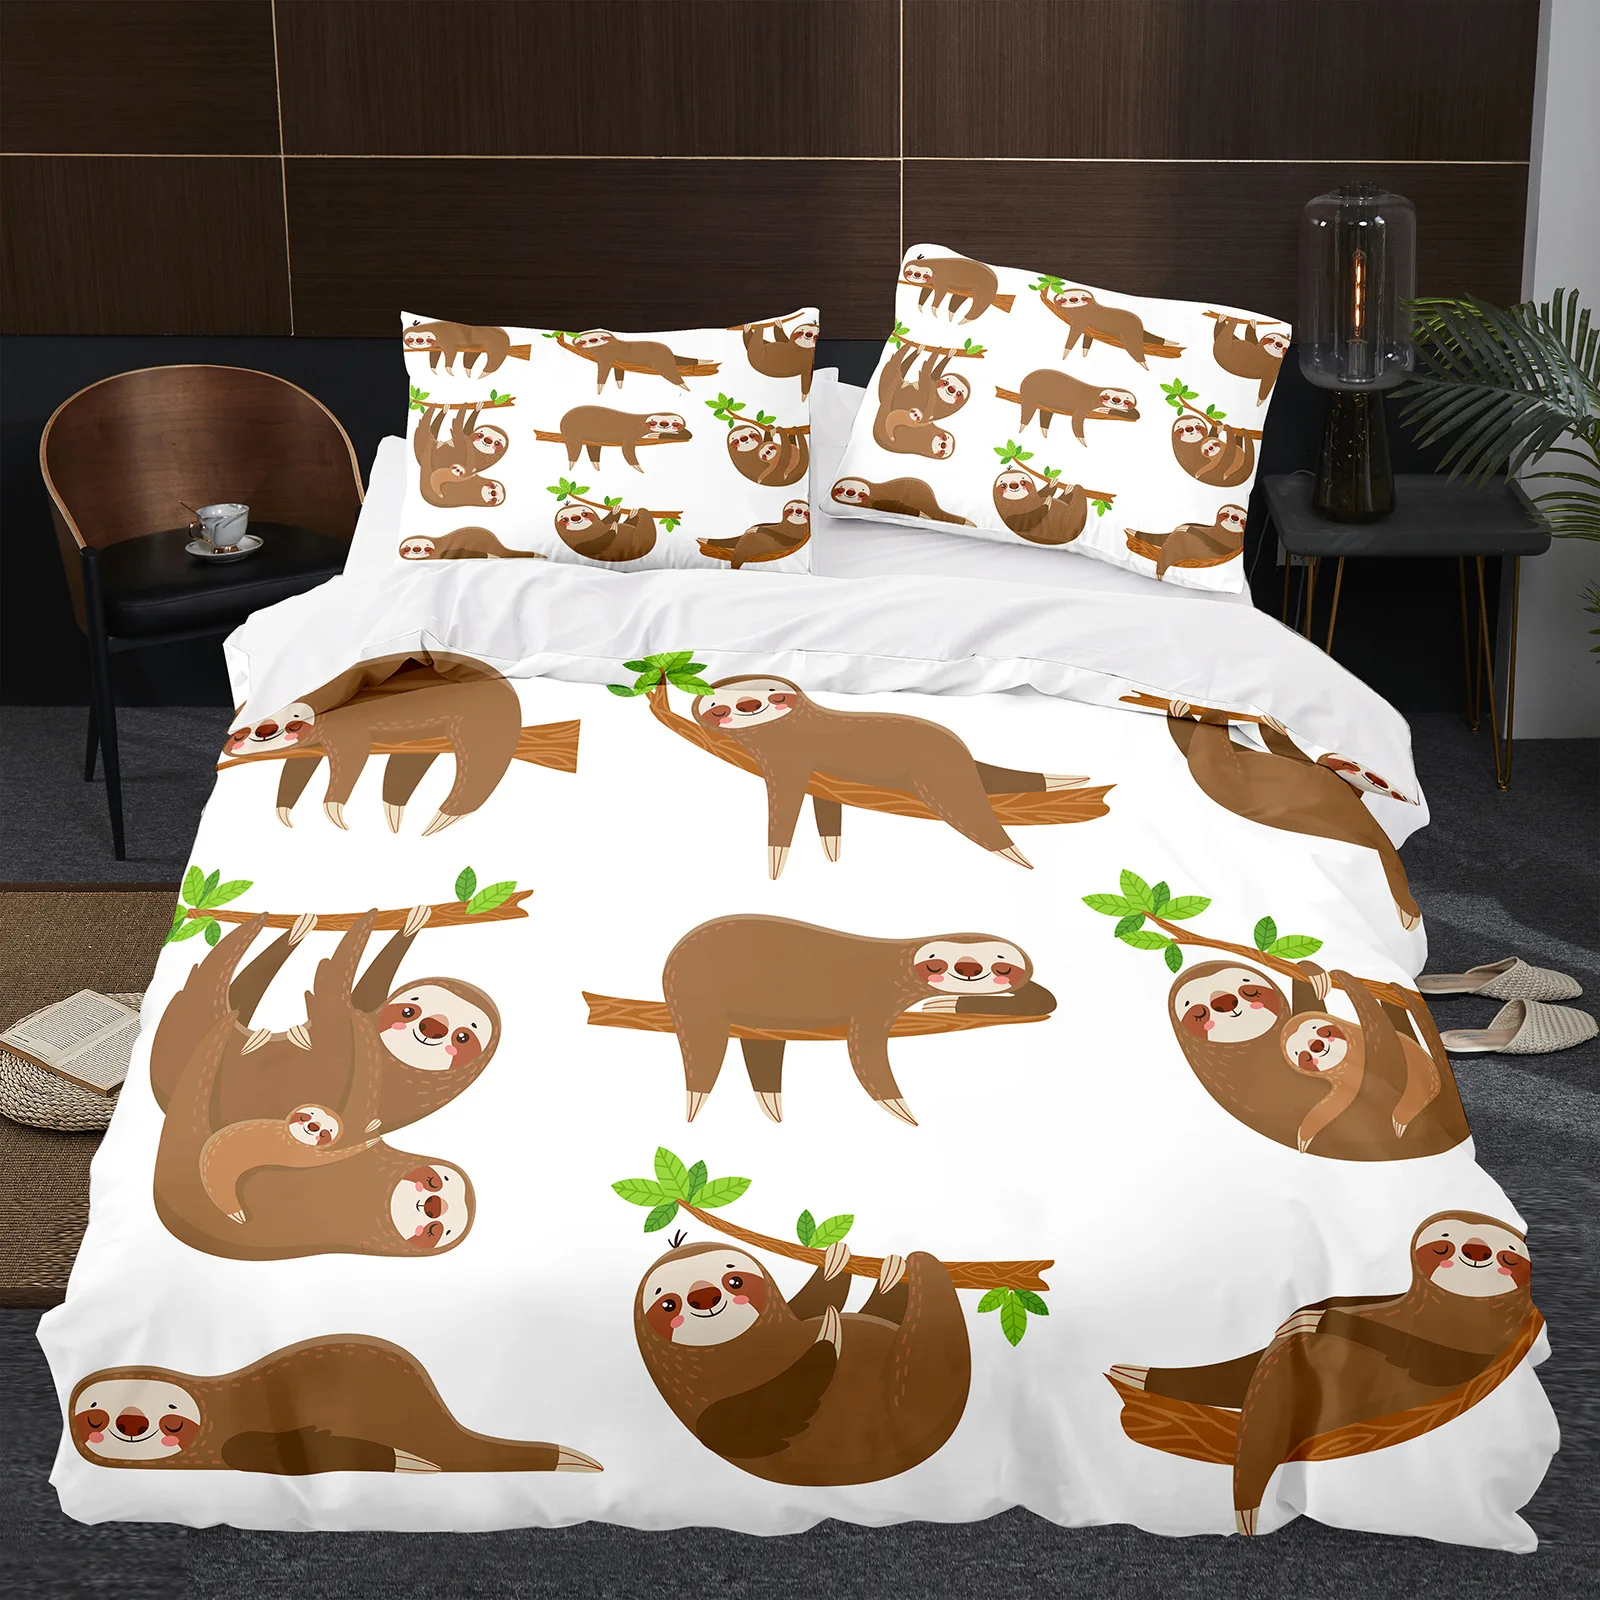 

Cute Sloth Animal 3D Bedding Set Duvet Cover Quilt Cover Polyester GifeFor Kids Single Double Twin Queen King Room Decor